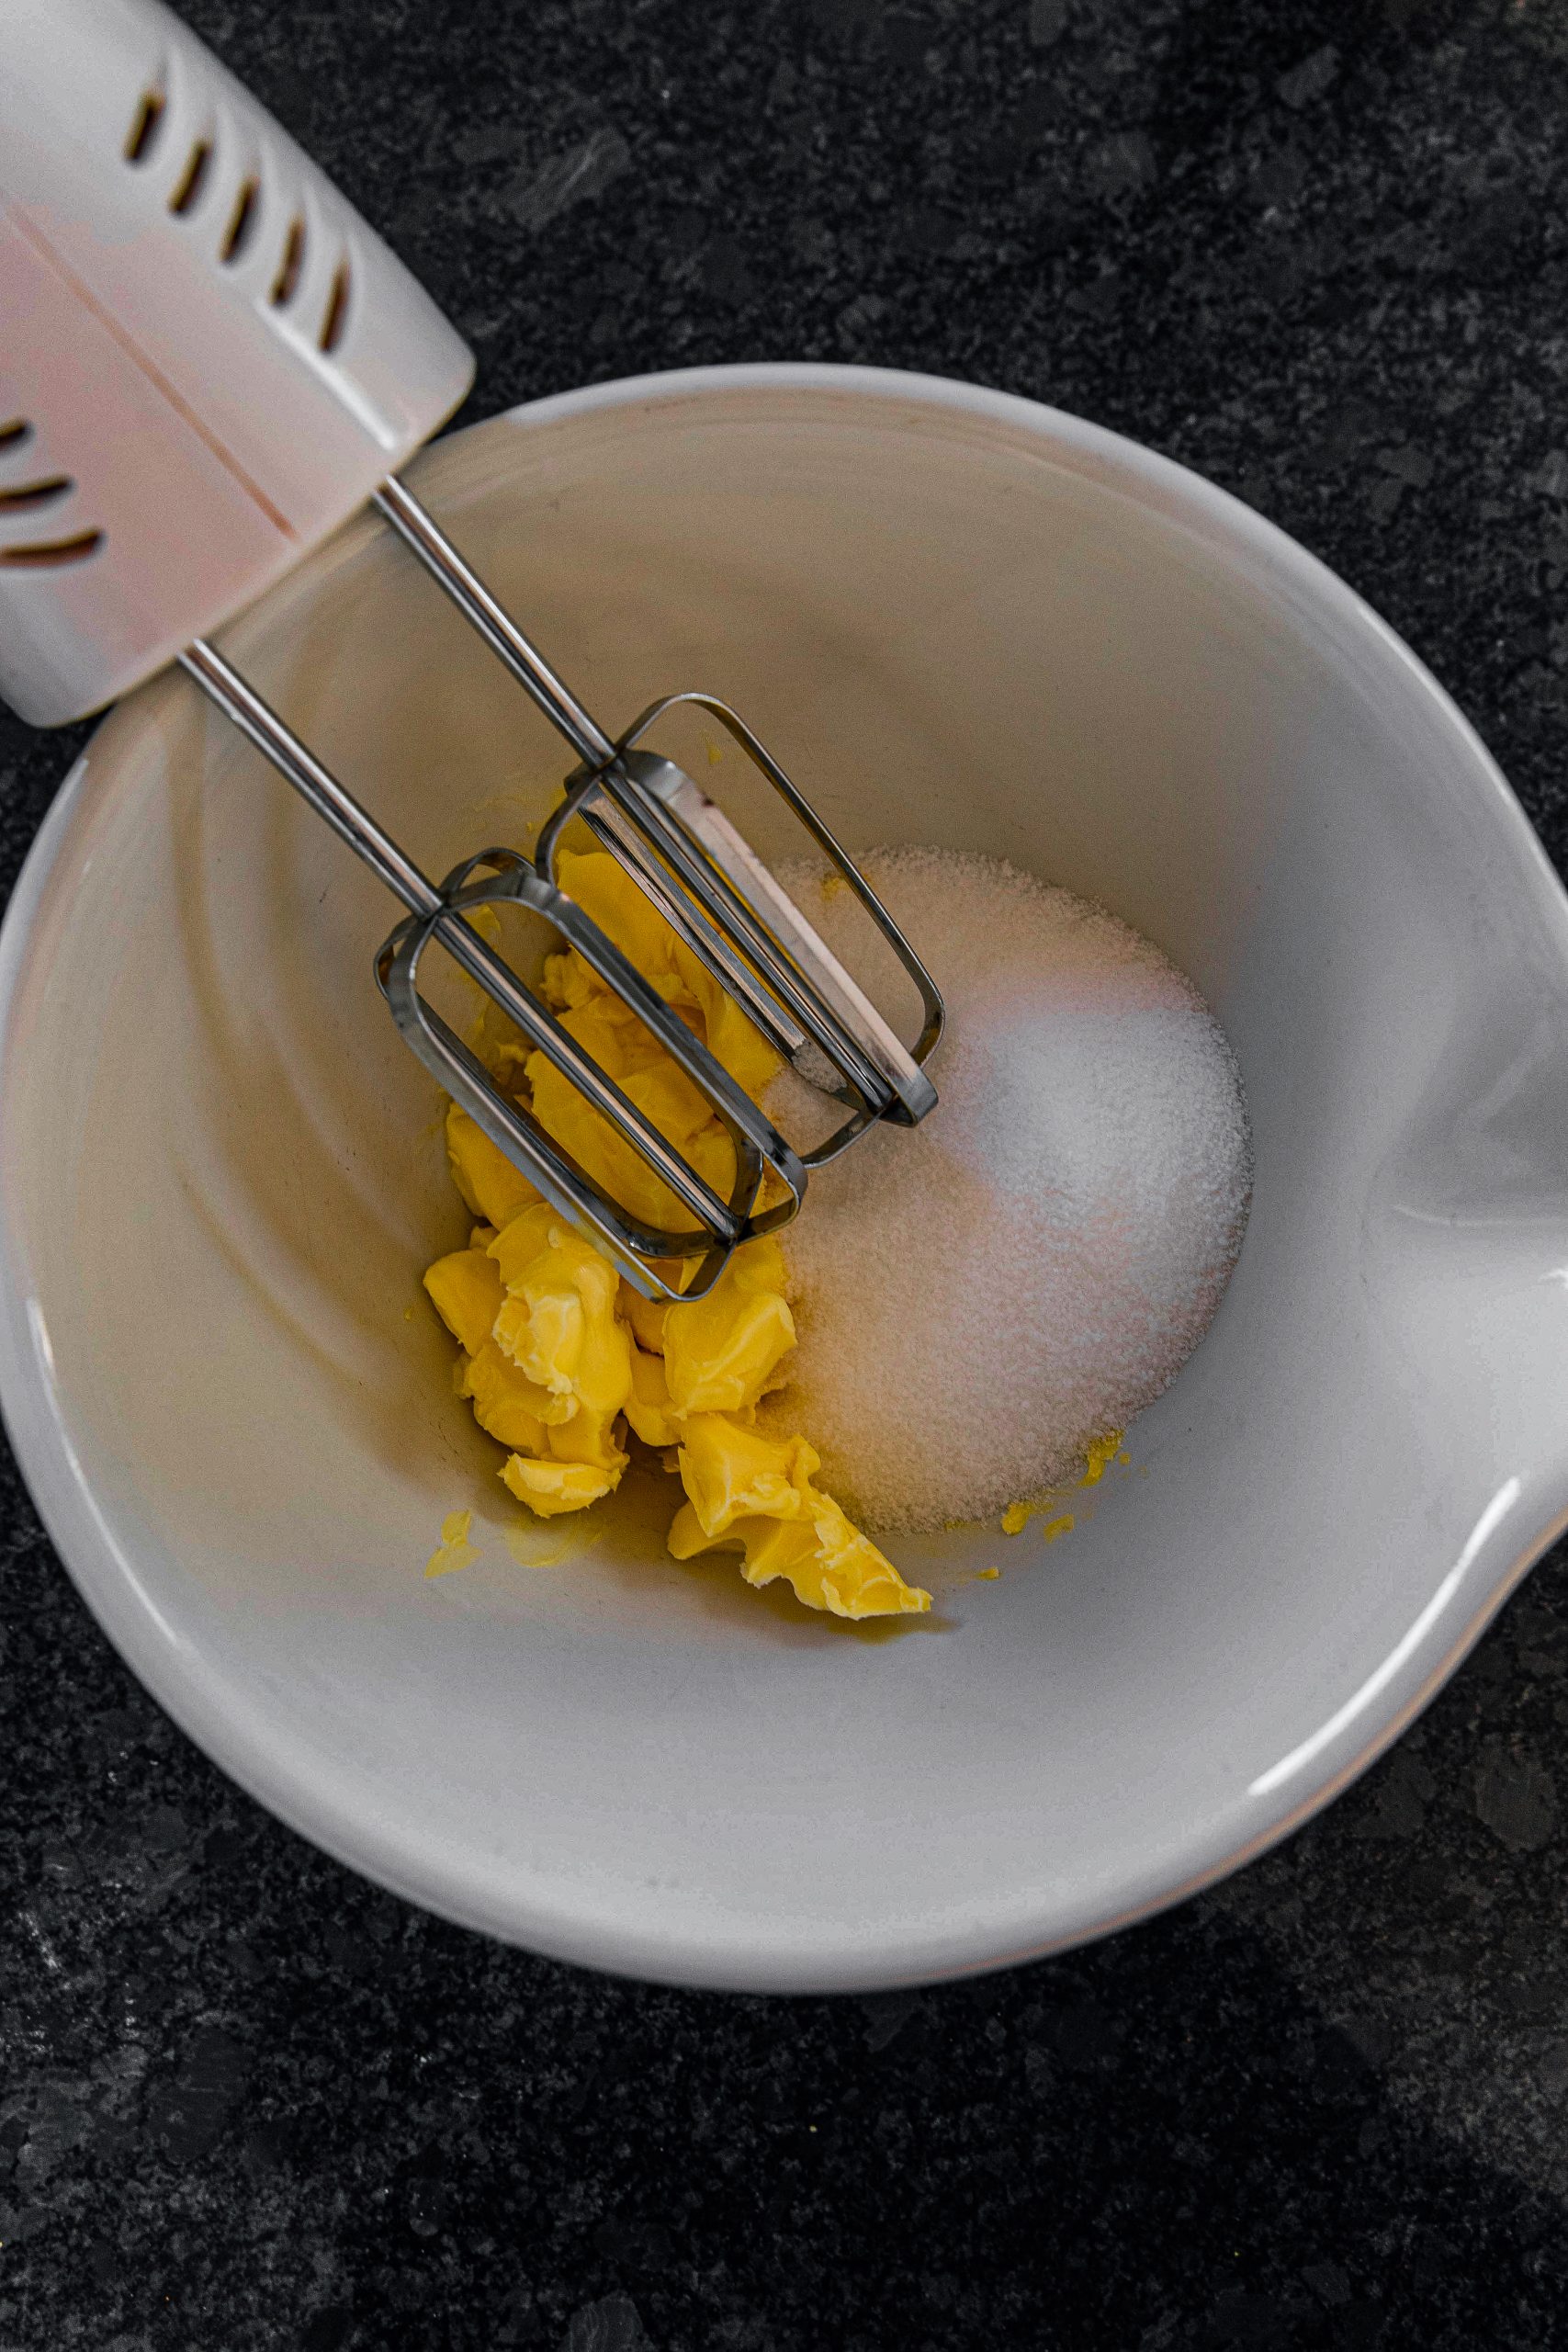 Add a ½ cup of butter and 1 cup of raw sugar in a medium mixing bowl. Using an electric mixer, mix it until it’s creamy. 